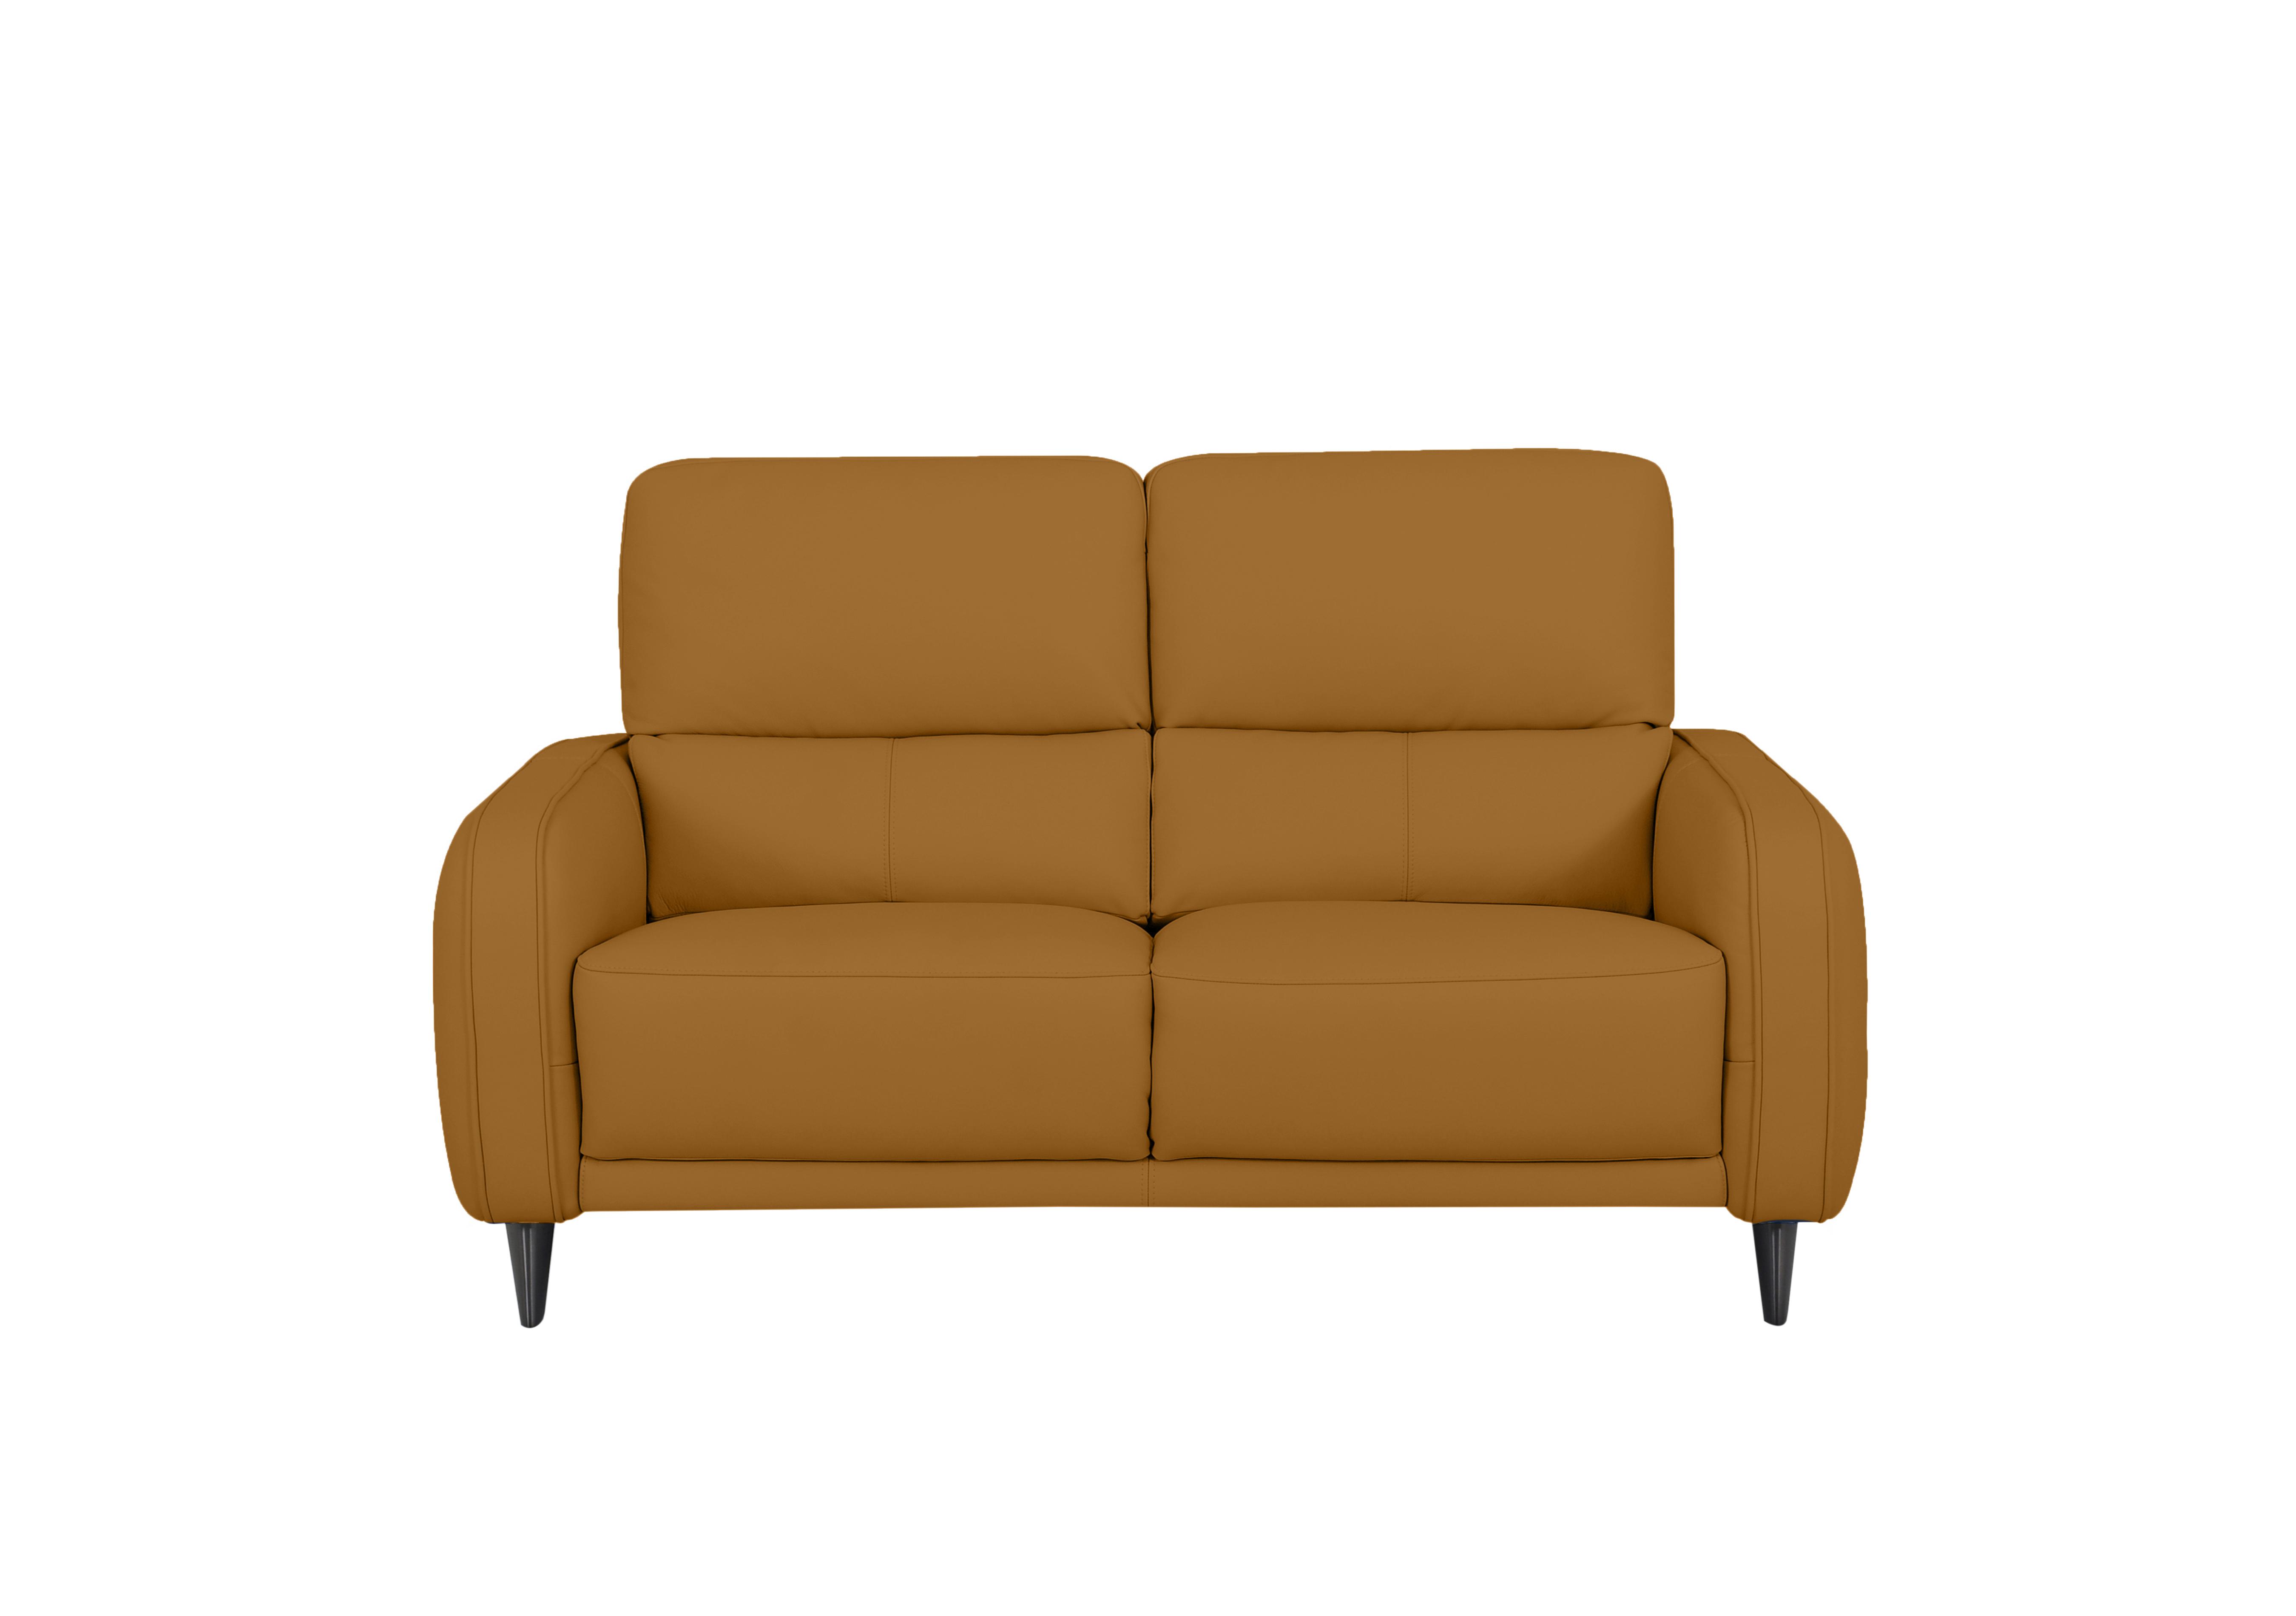 Logan 2.5 Seater Leather Sofa in Np-606e Honey Yellow on Furniture Village